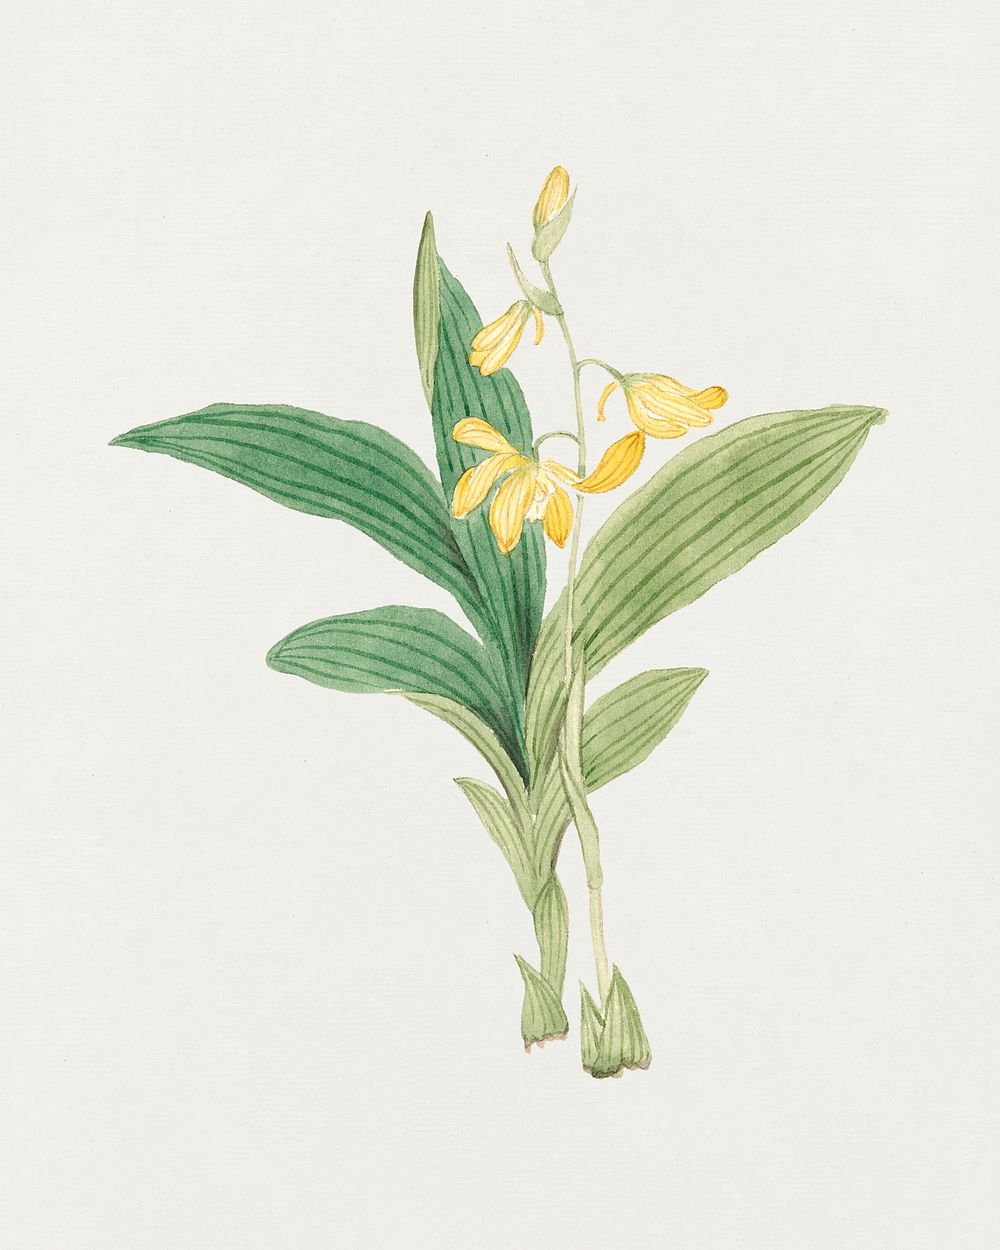 Flower psd Maxillaria Lindleyana, vintage Japanese art remix from the David Murray collection